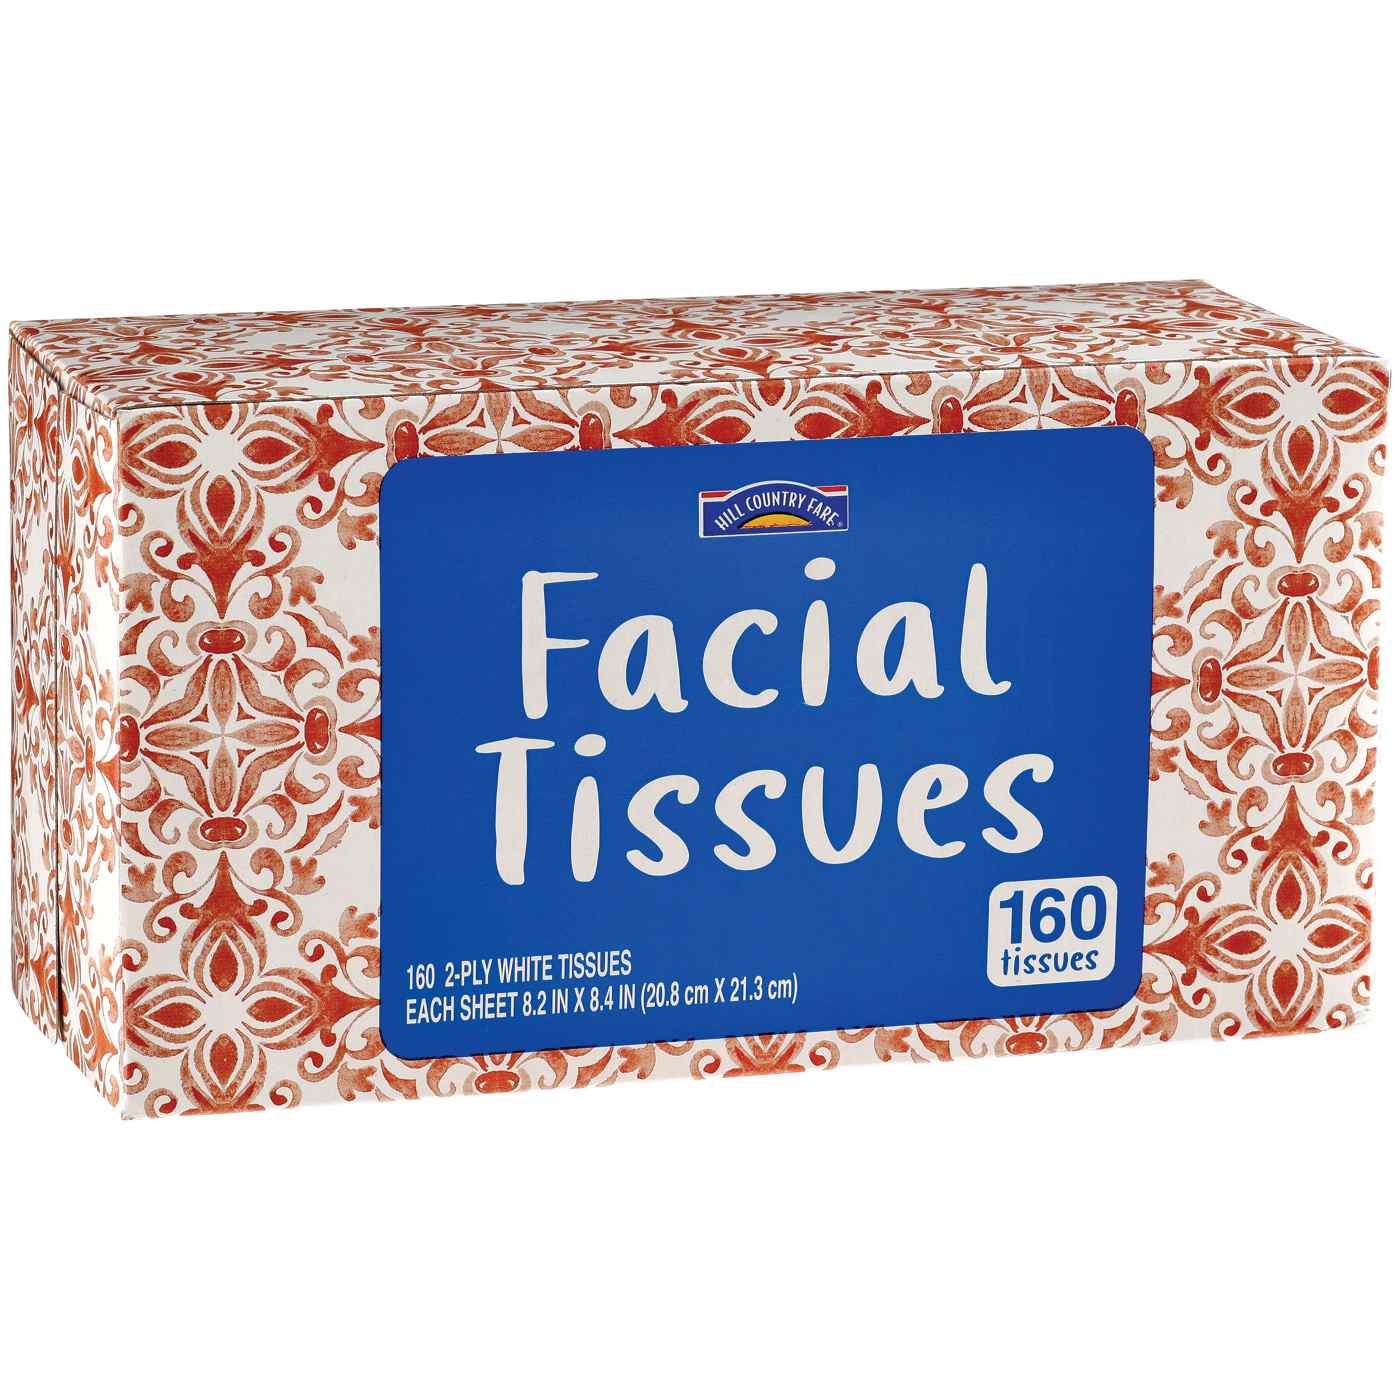 Hill Country Fare Facial Tissues; image 2 of 4